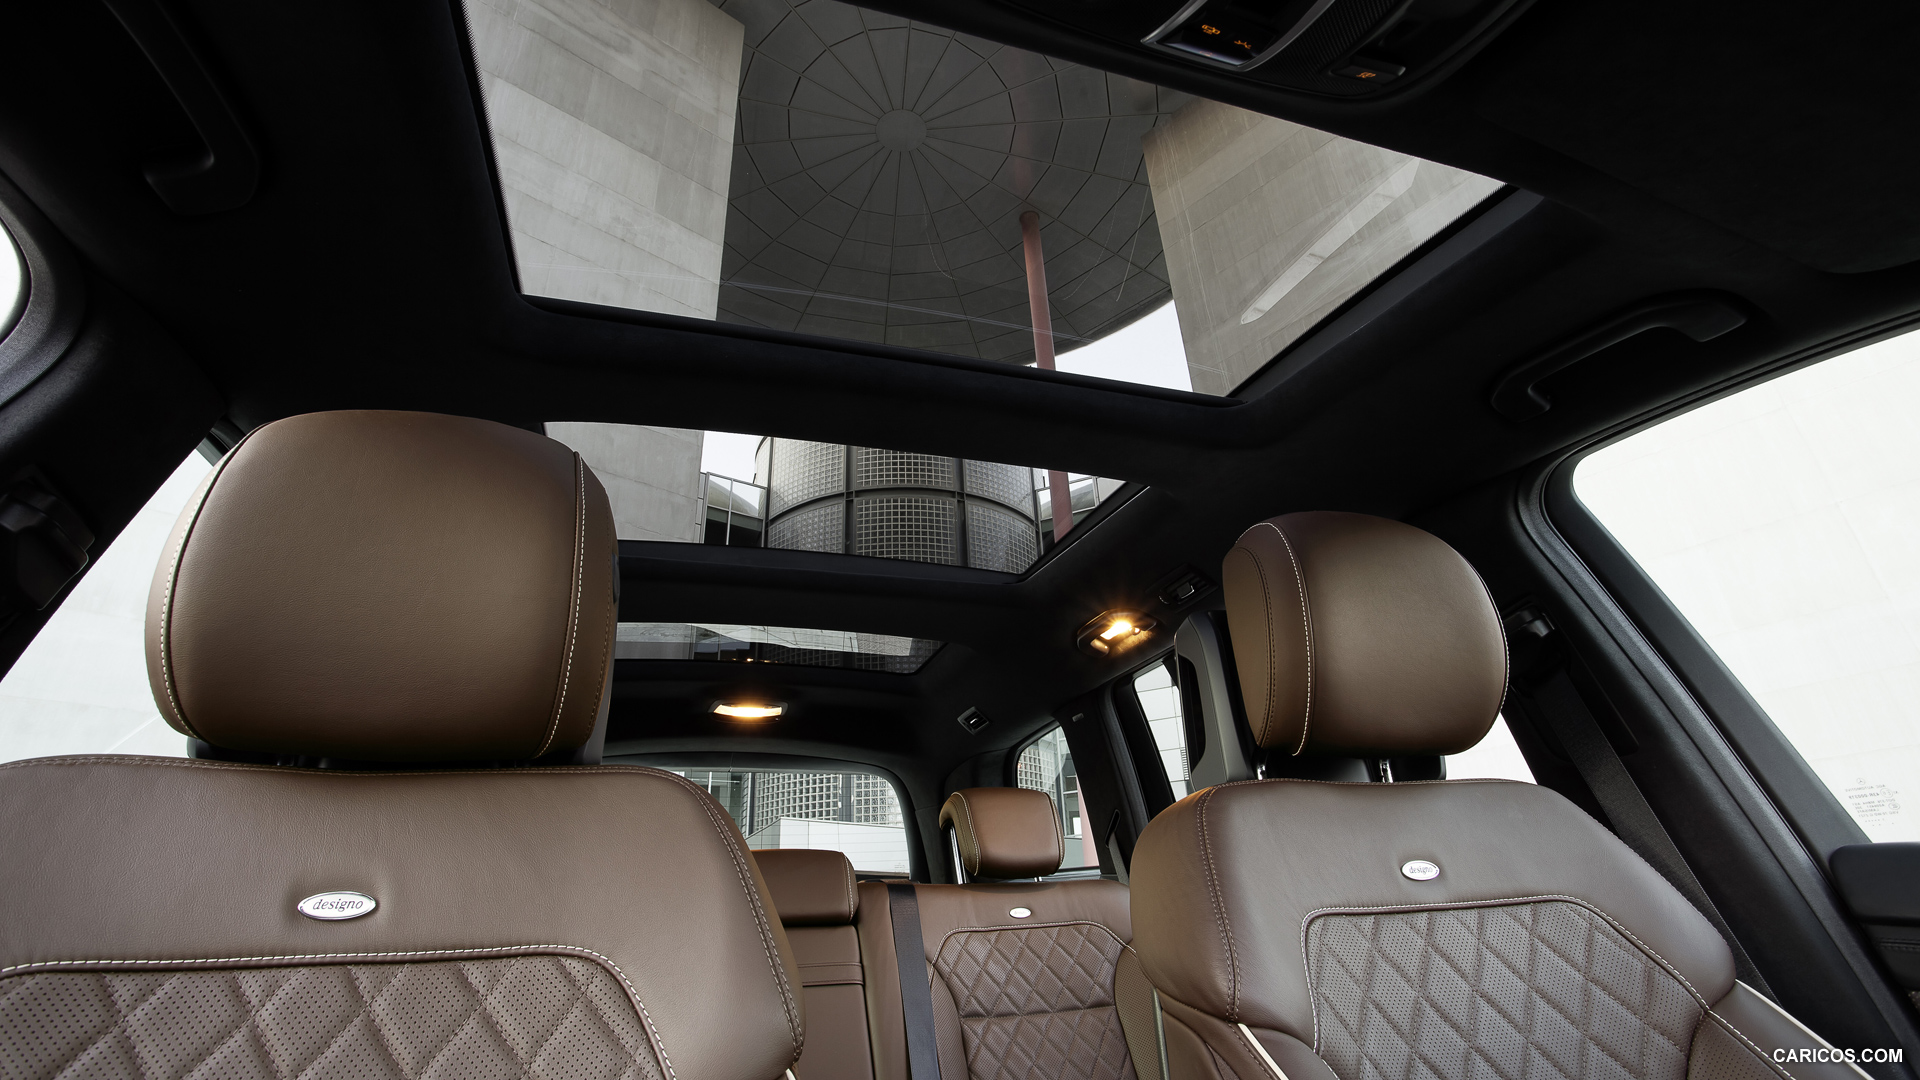 2013 Mercedes-Benz GL-Class Panoramic Sliding Sunroof - , #134 of 259